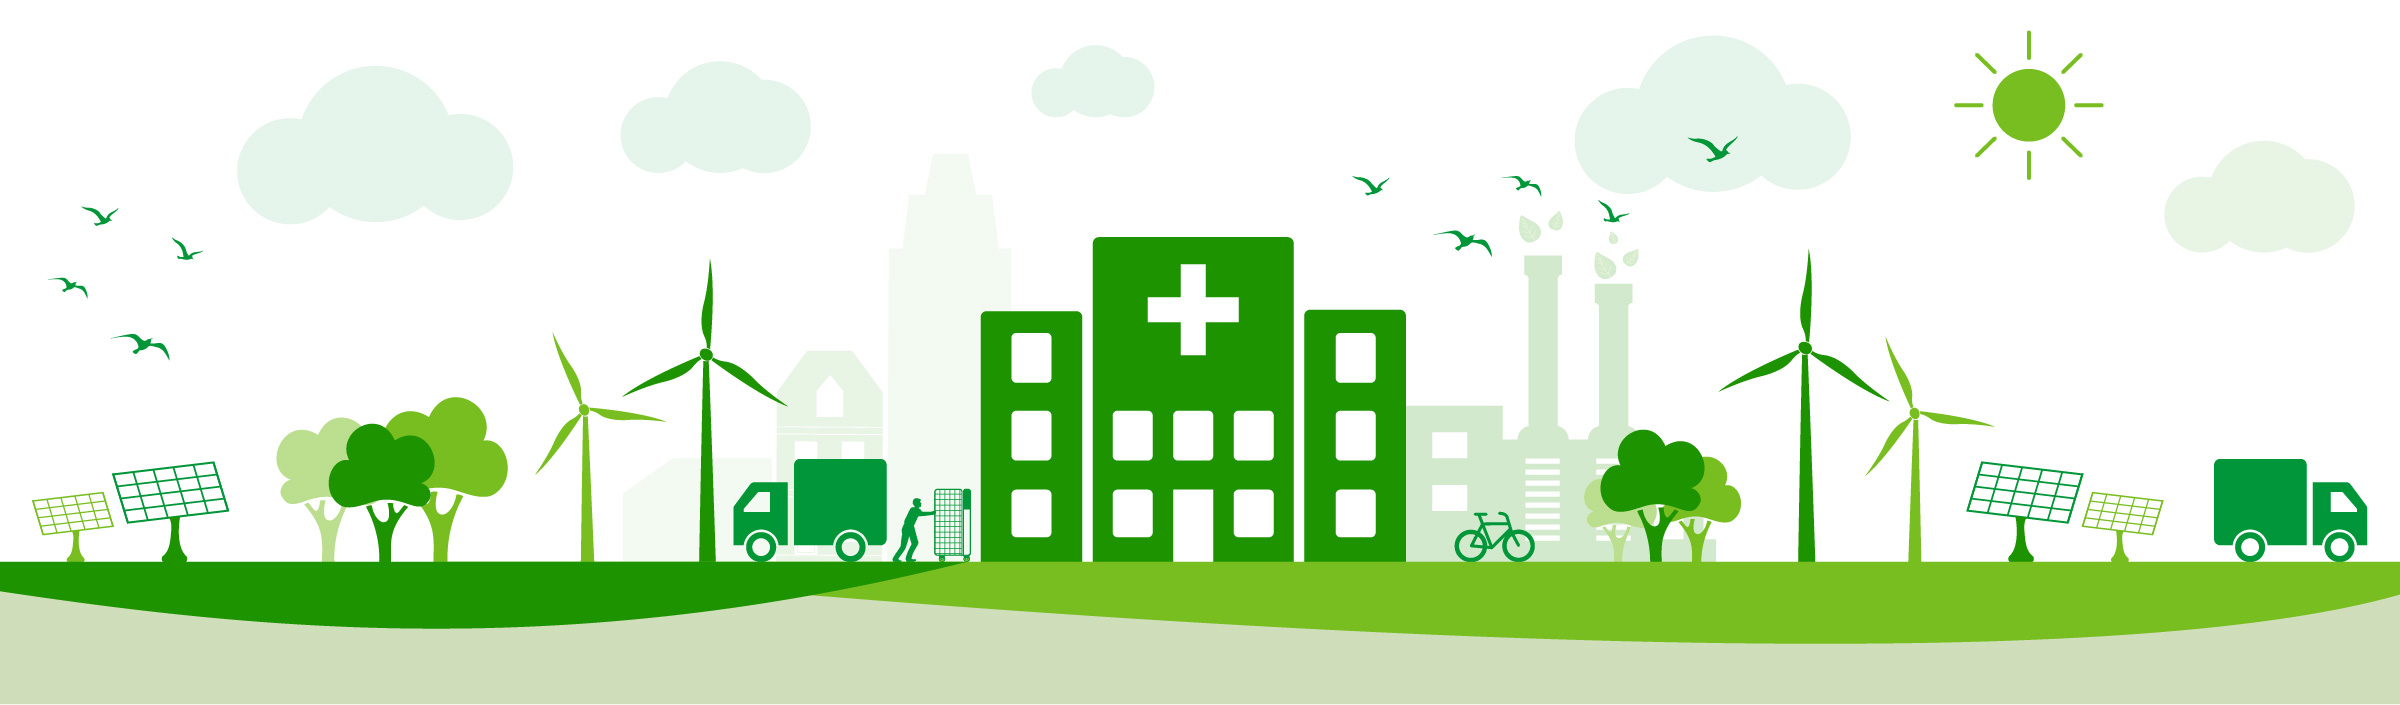 NHS Supply Chain Sustainability Strategy - Delivering Health Sustainably